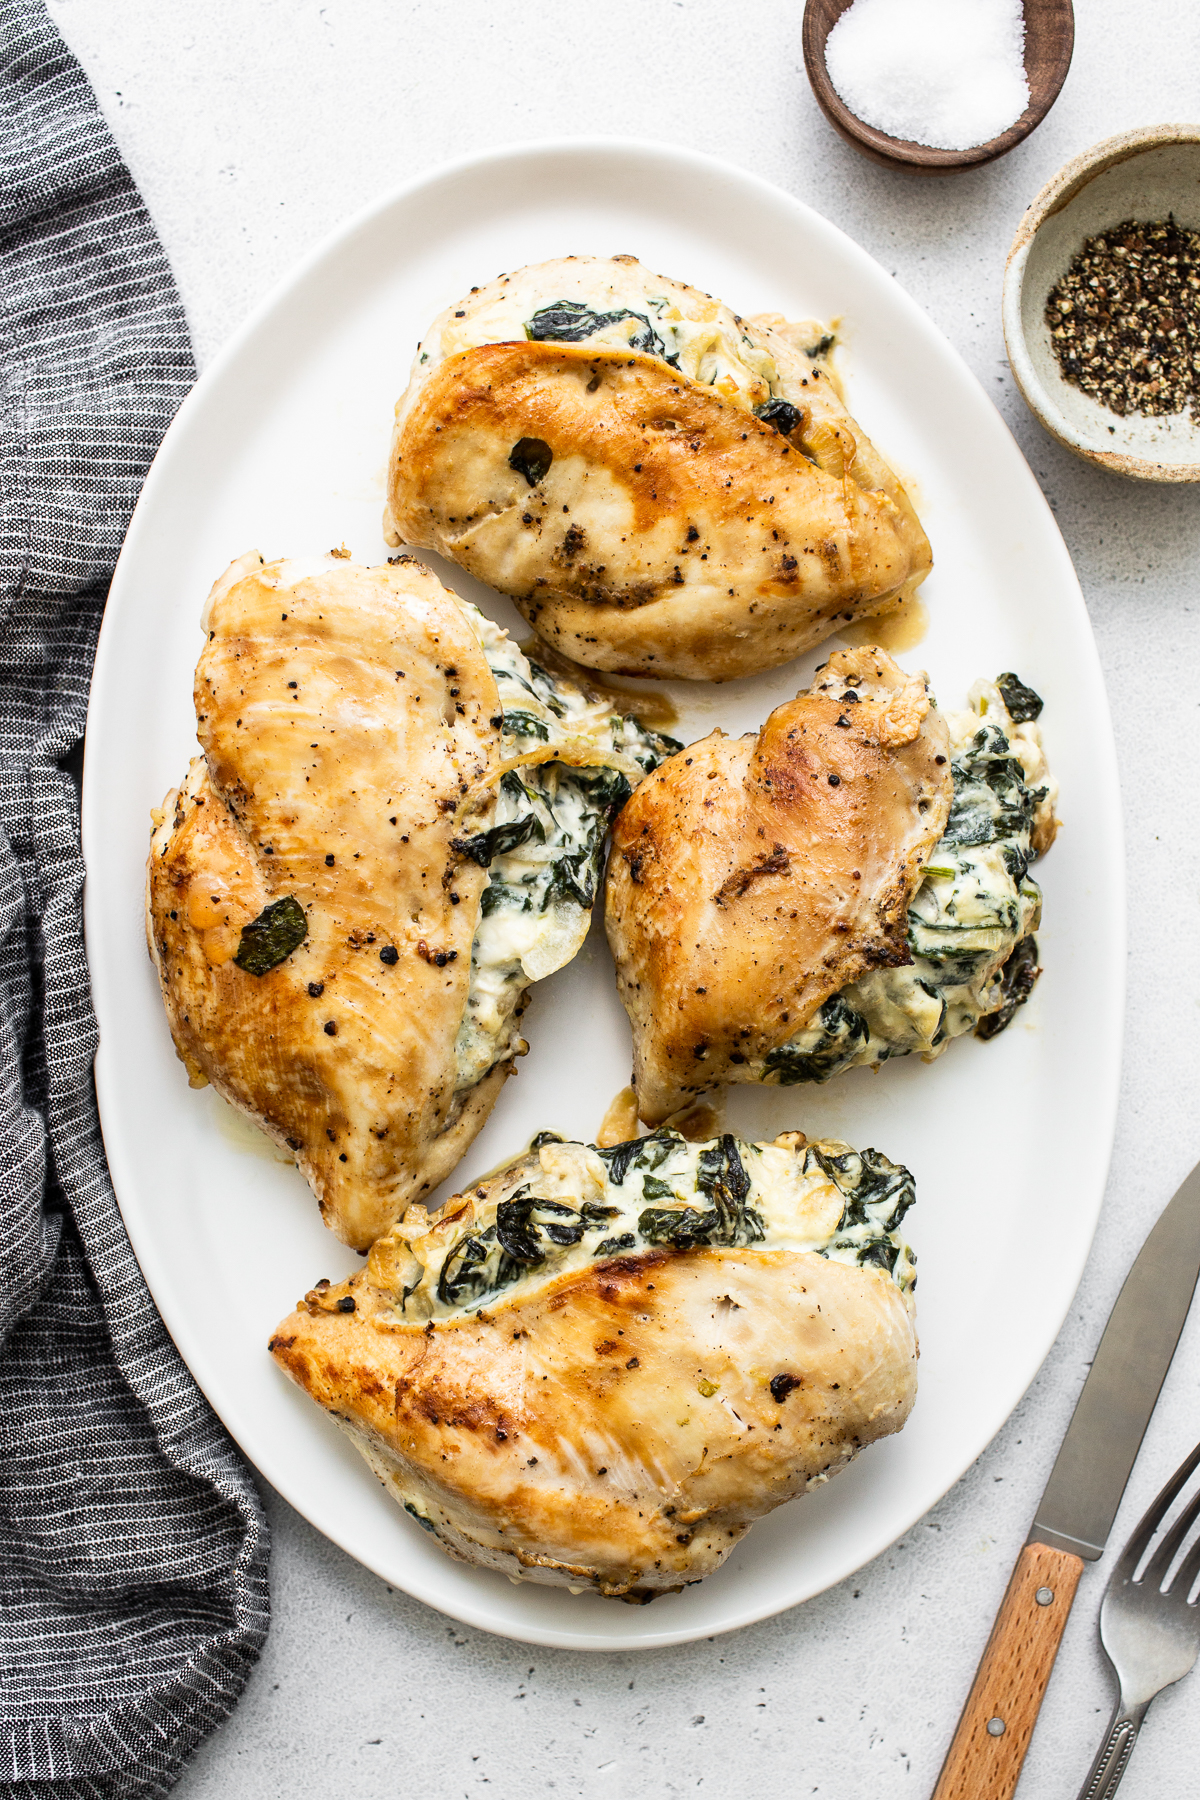 Spinach stuffed chicken breast on a plate.